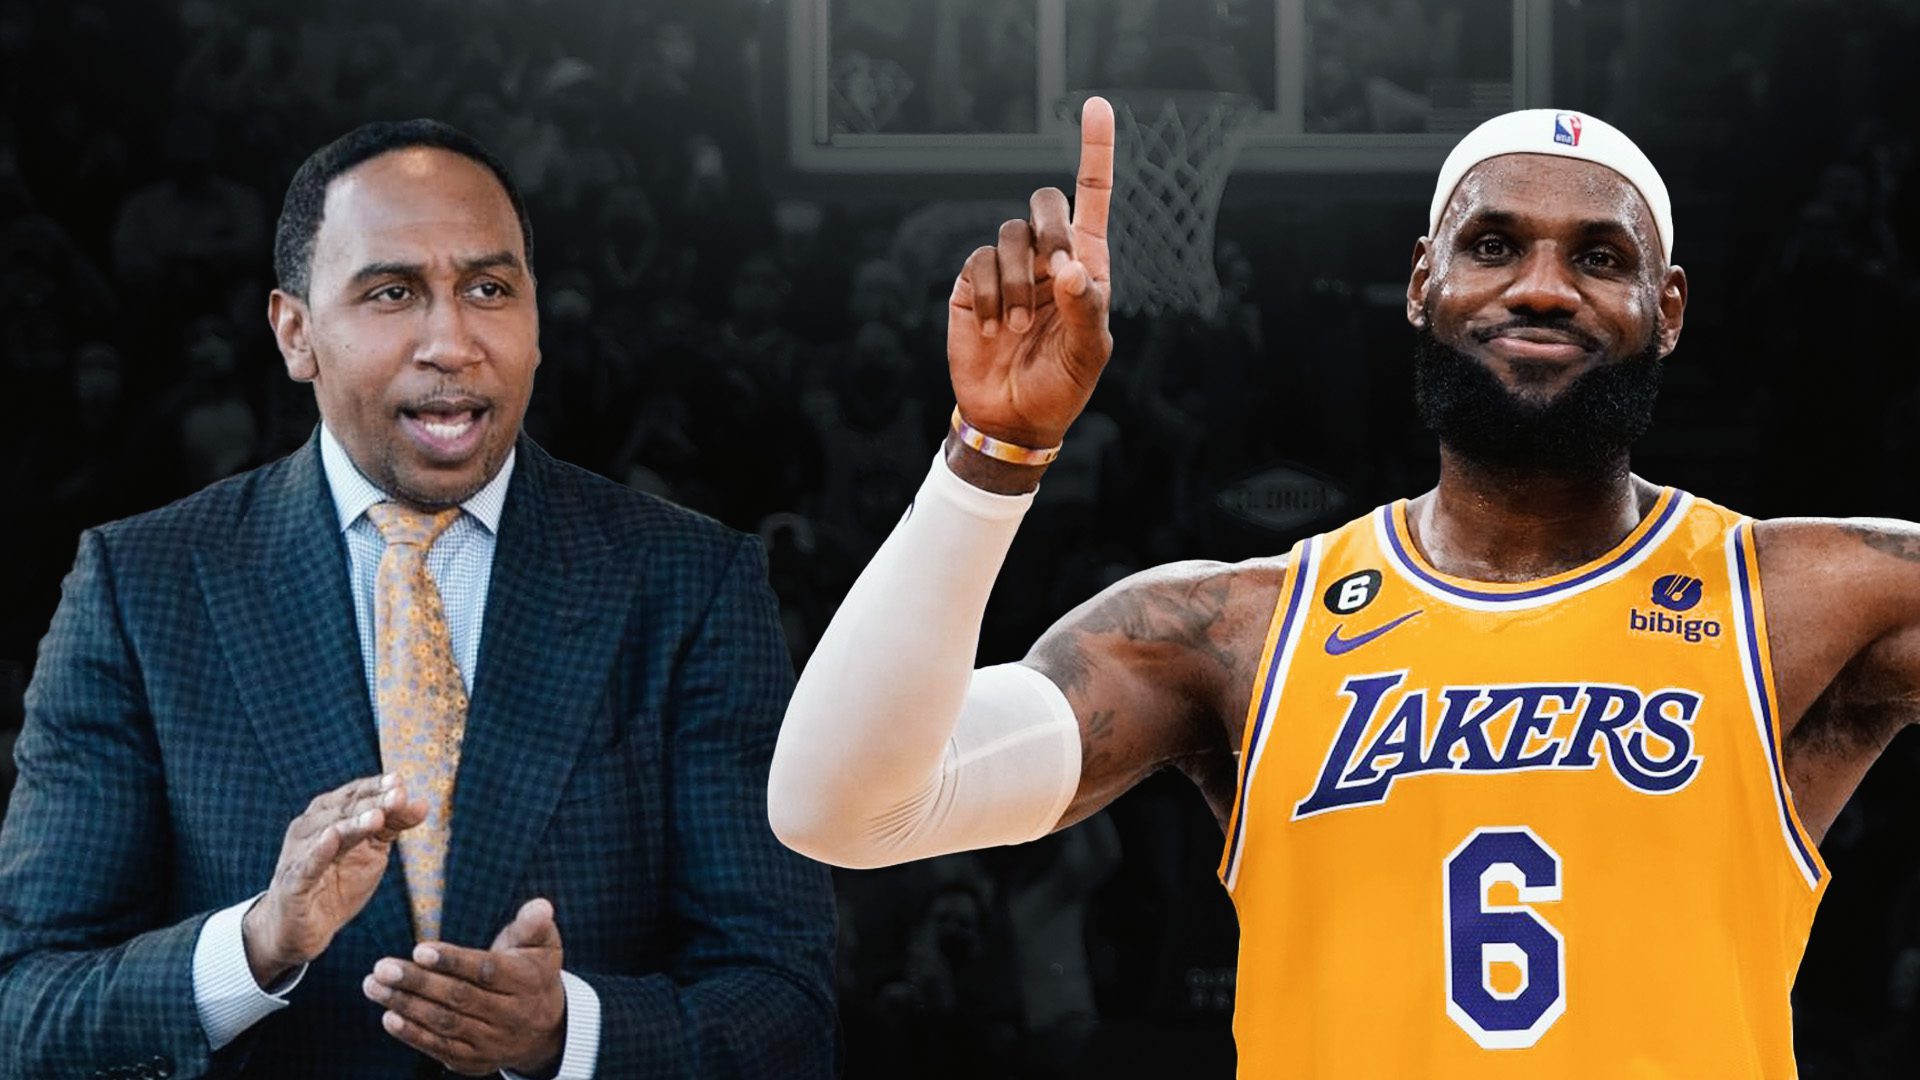 Stephen A. Smith Says if LeBron Wins Fifth Title He Could Surpass MJ’s GOAT Status